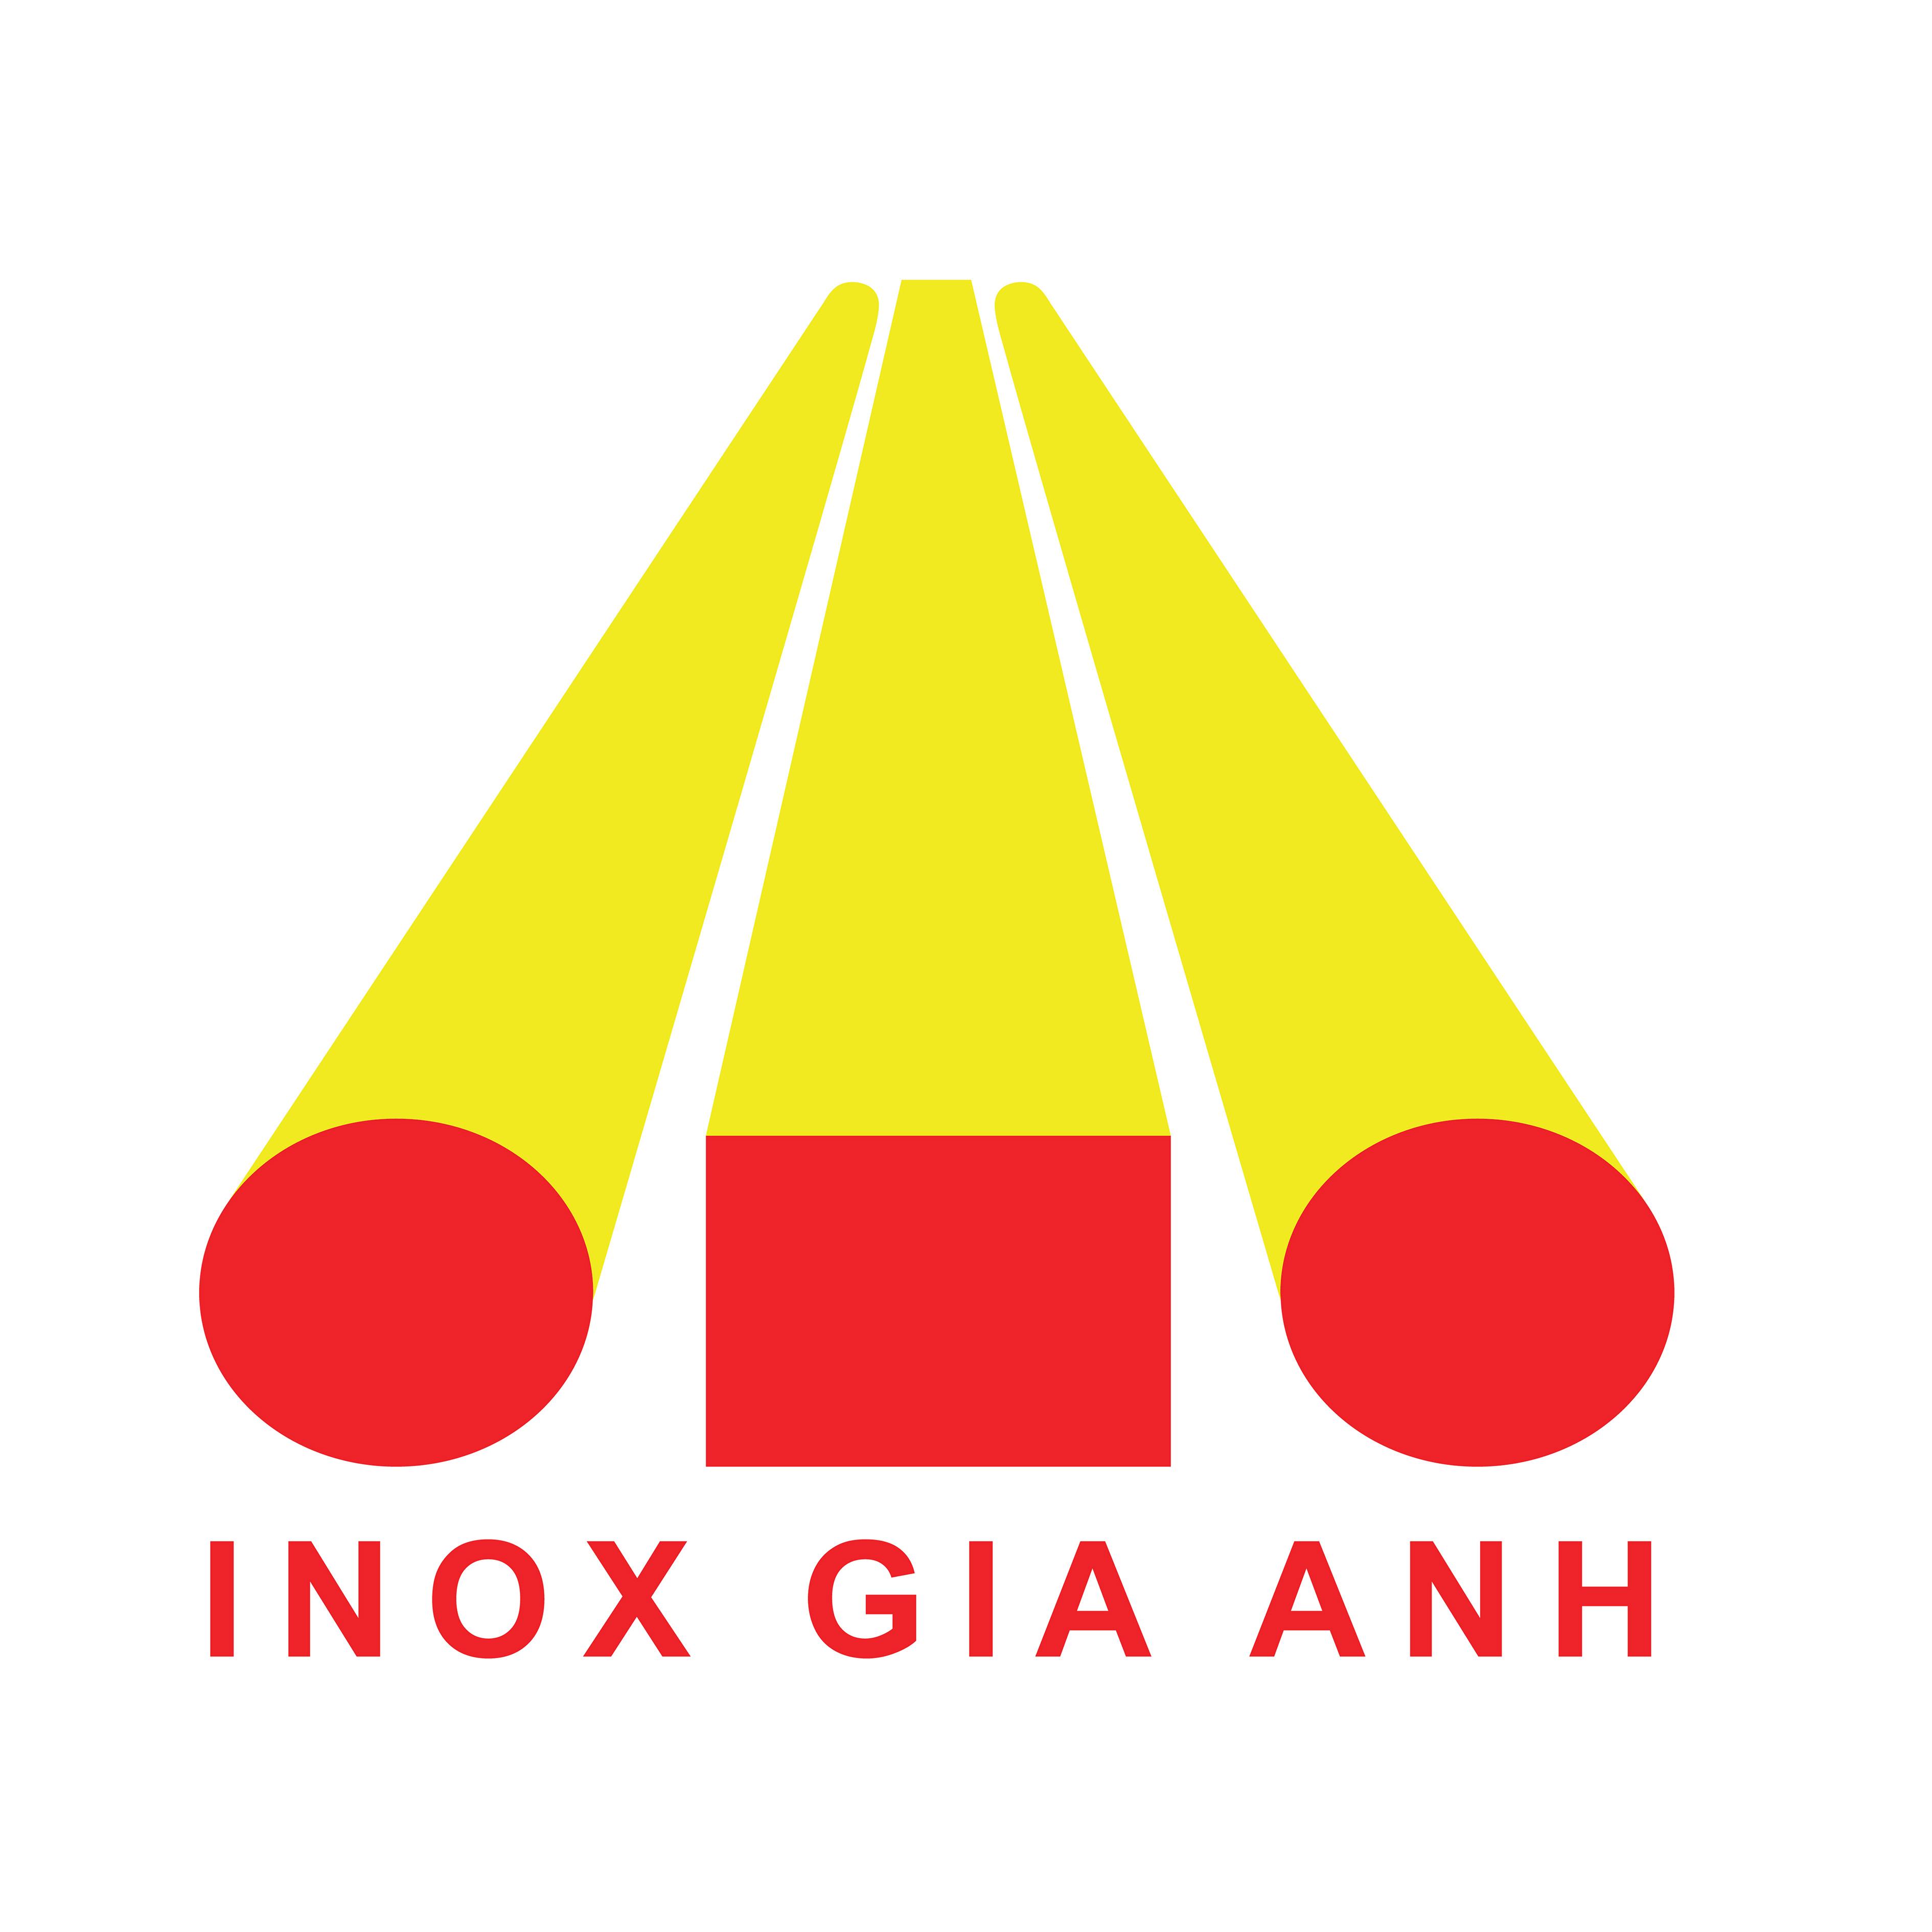 GIA ANH HUNG YEN COMPANY LIMITED